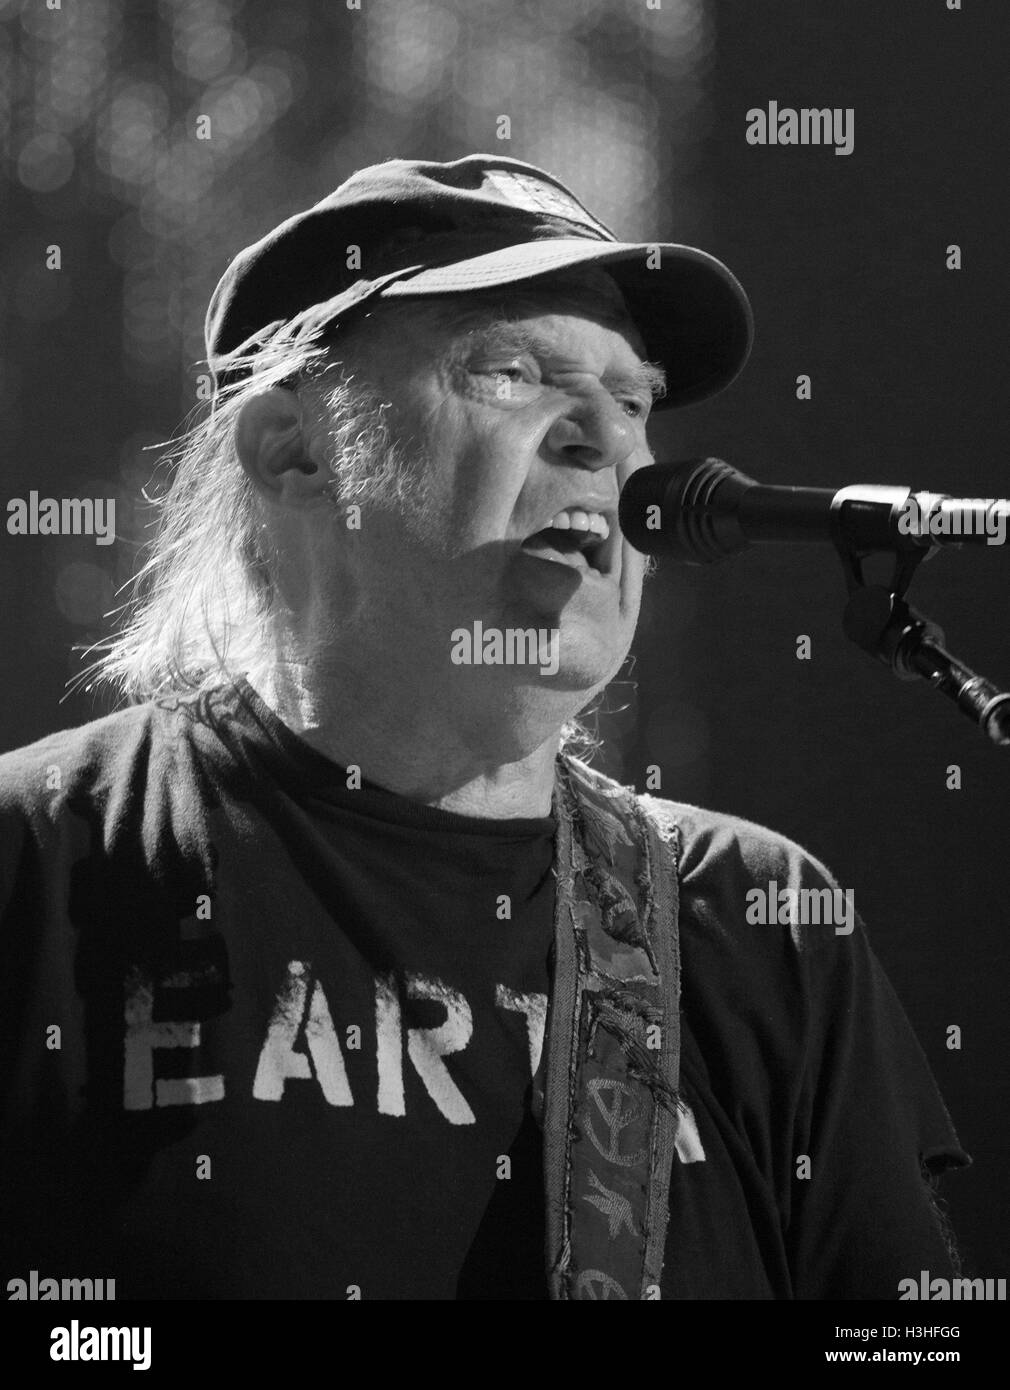 Neil Young performs during the 2016 Farm Aid at Jiffy Lube Live on September 17, 2016 in Bristow, VA. Stock Photo